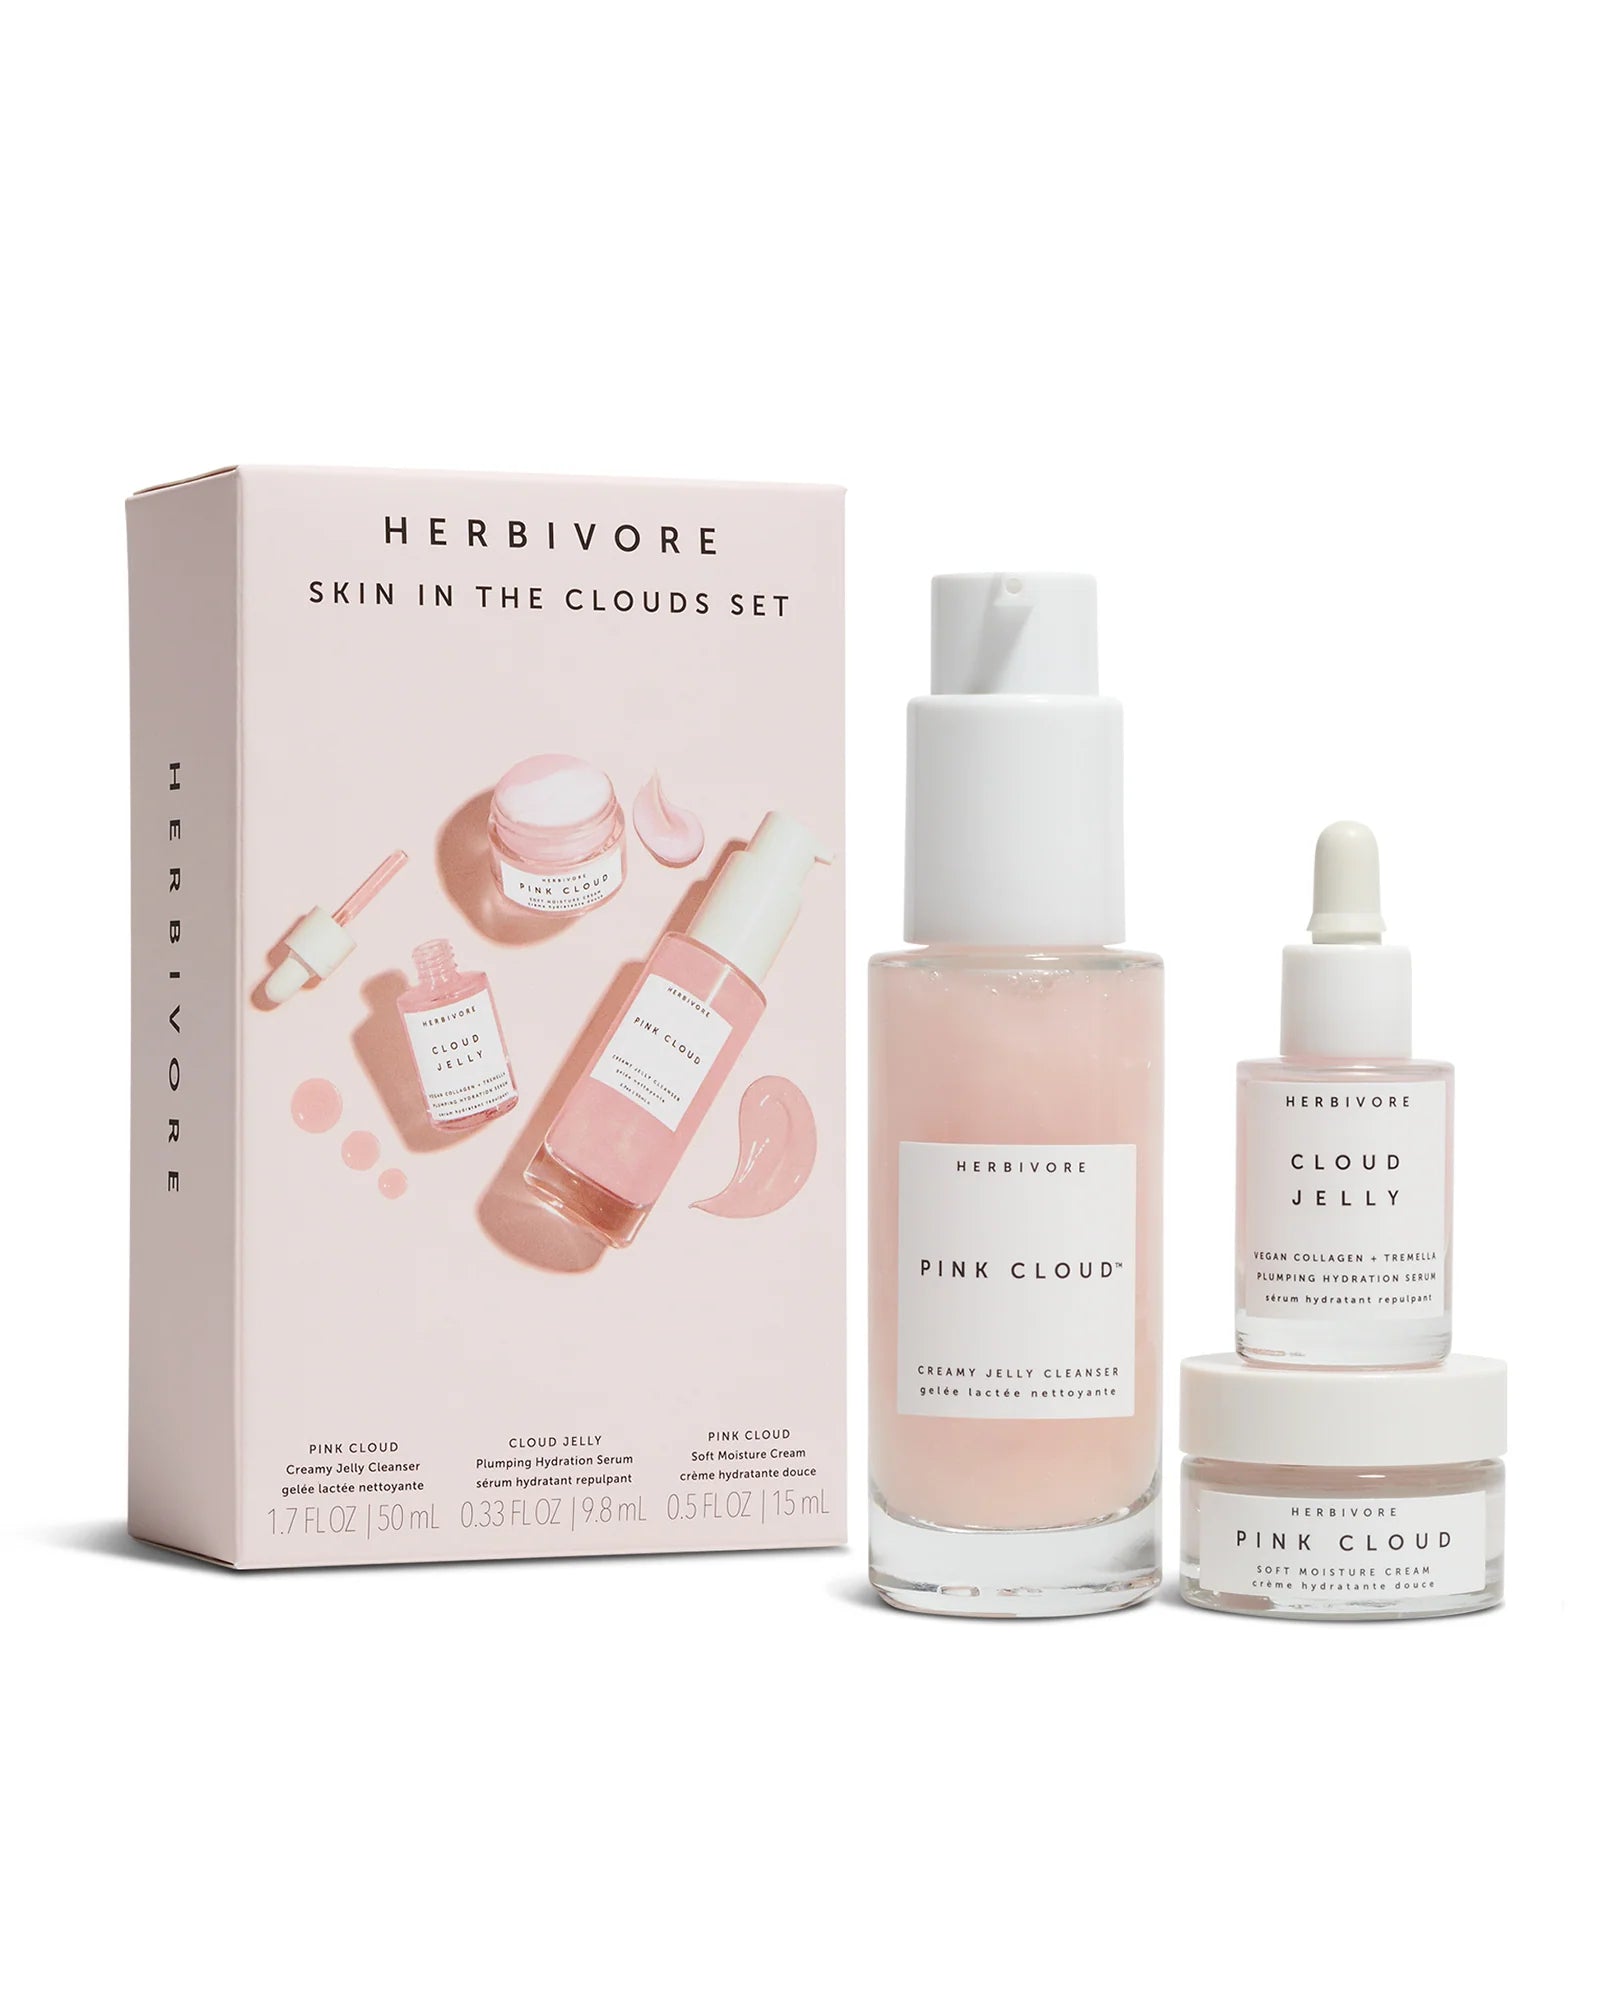 Herbivore Skin the the Clouds Plumping Hydration Set